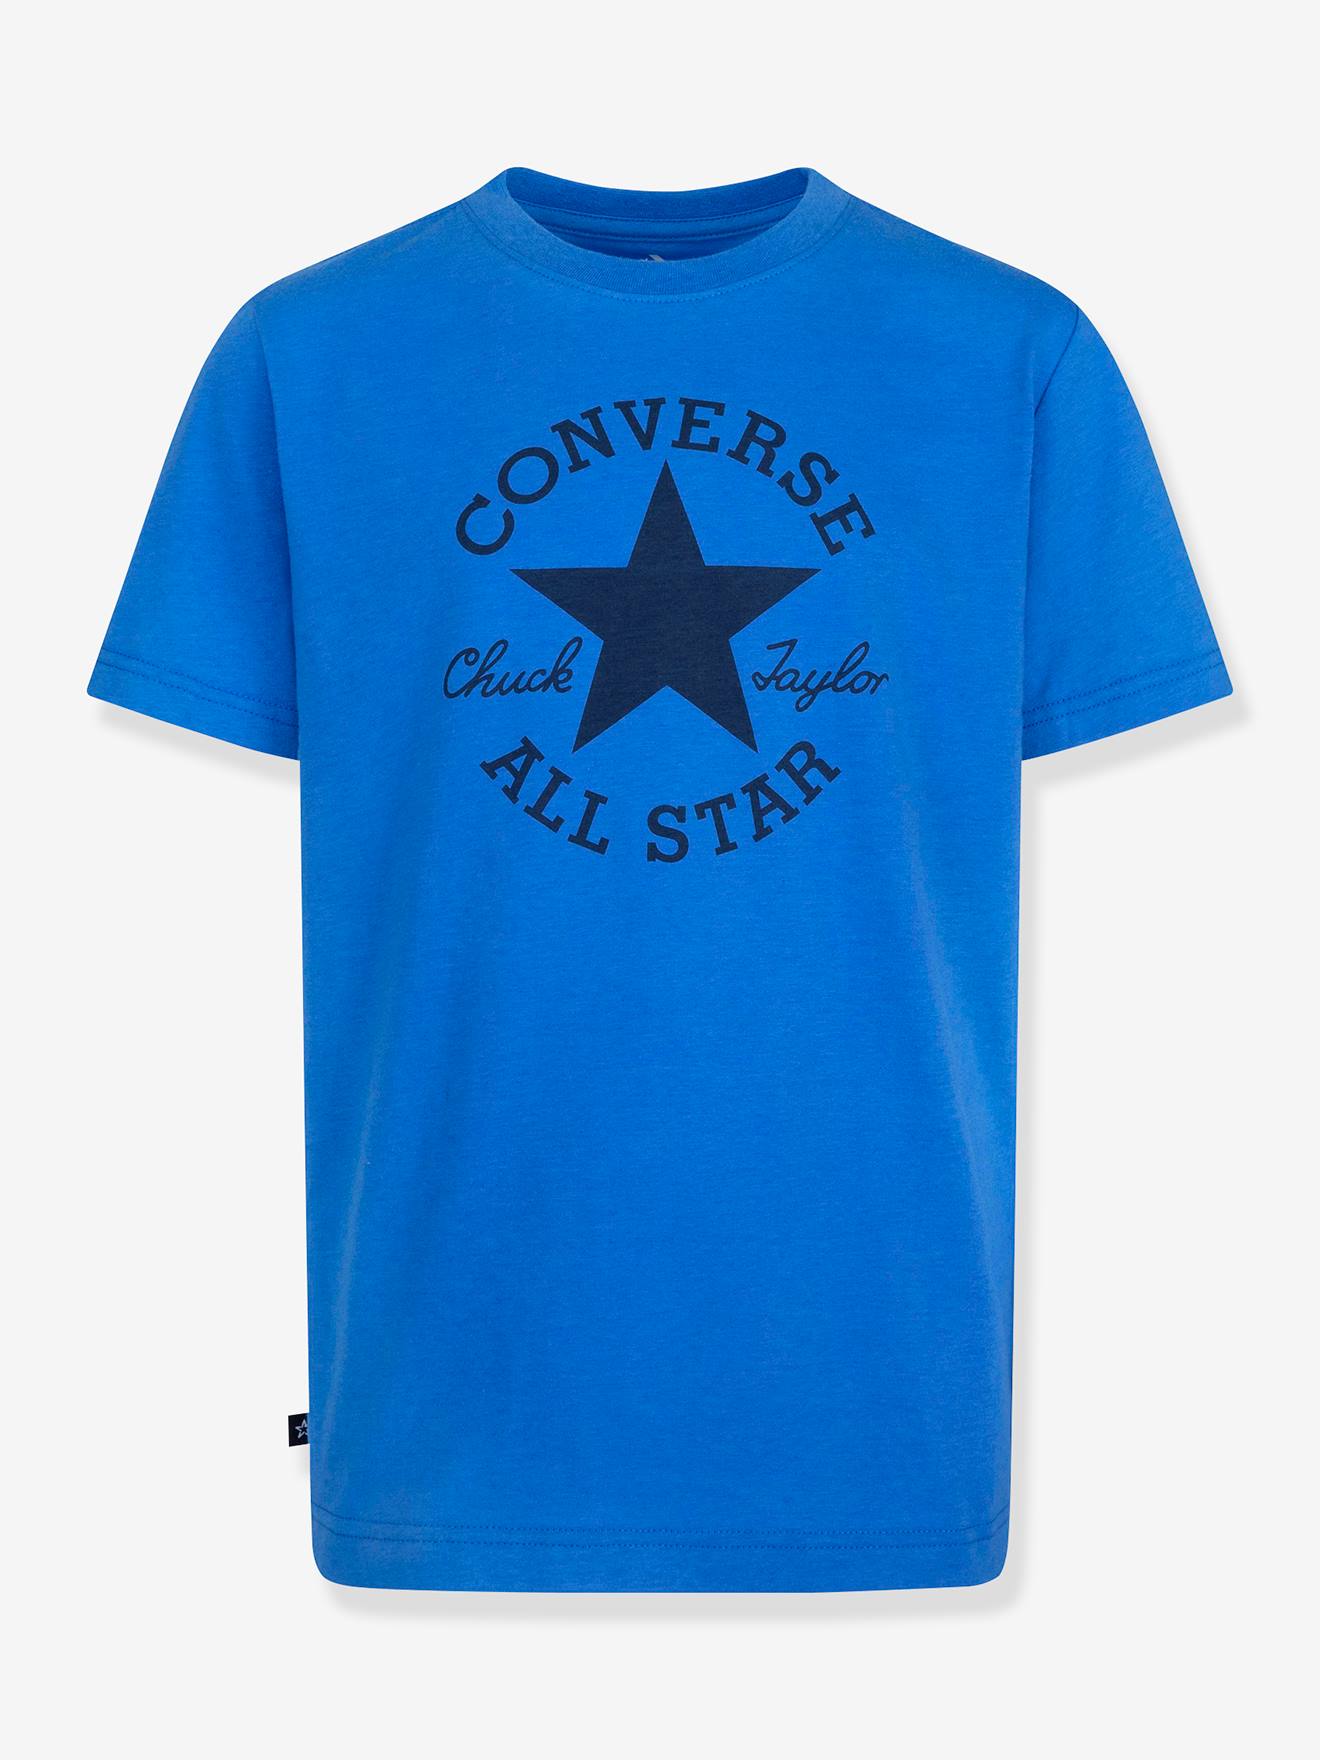 Chuck Patch T-Shirt by CONVERSE for Boys electric blue